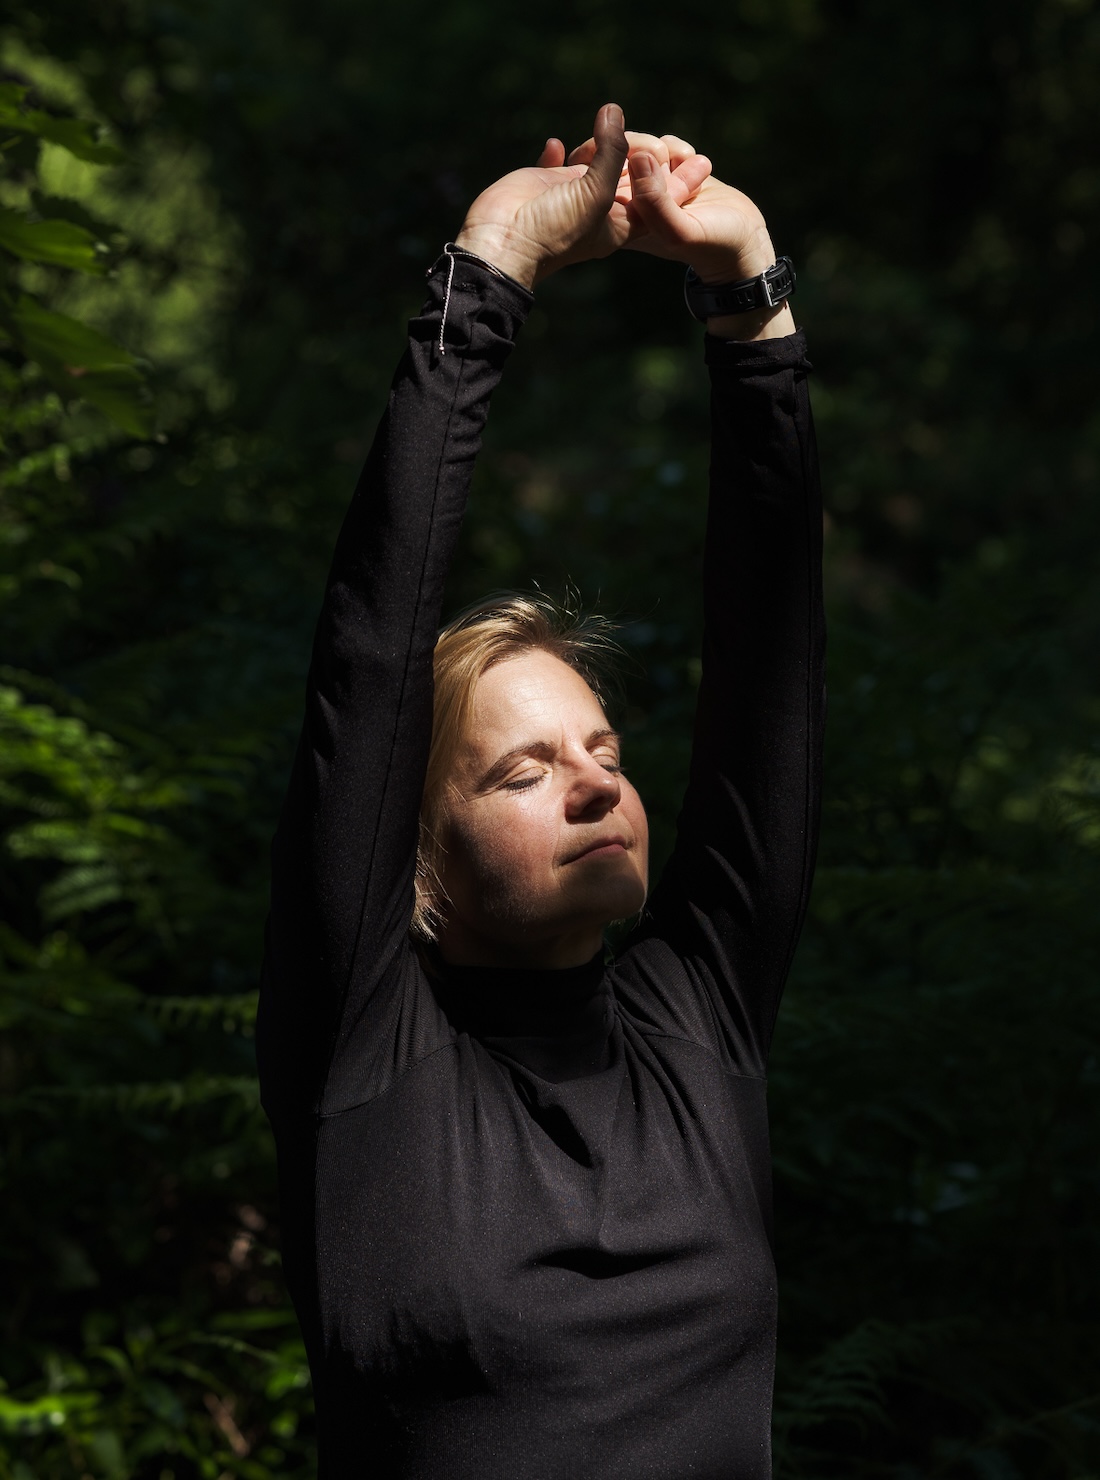 A woman in black stretching hands above head